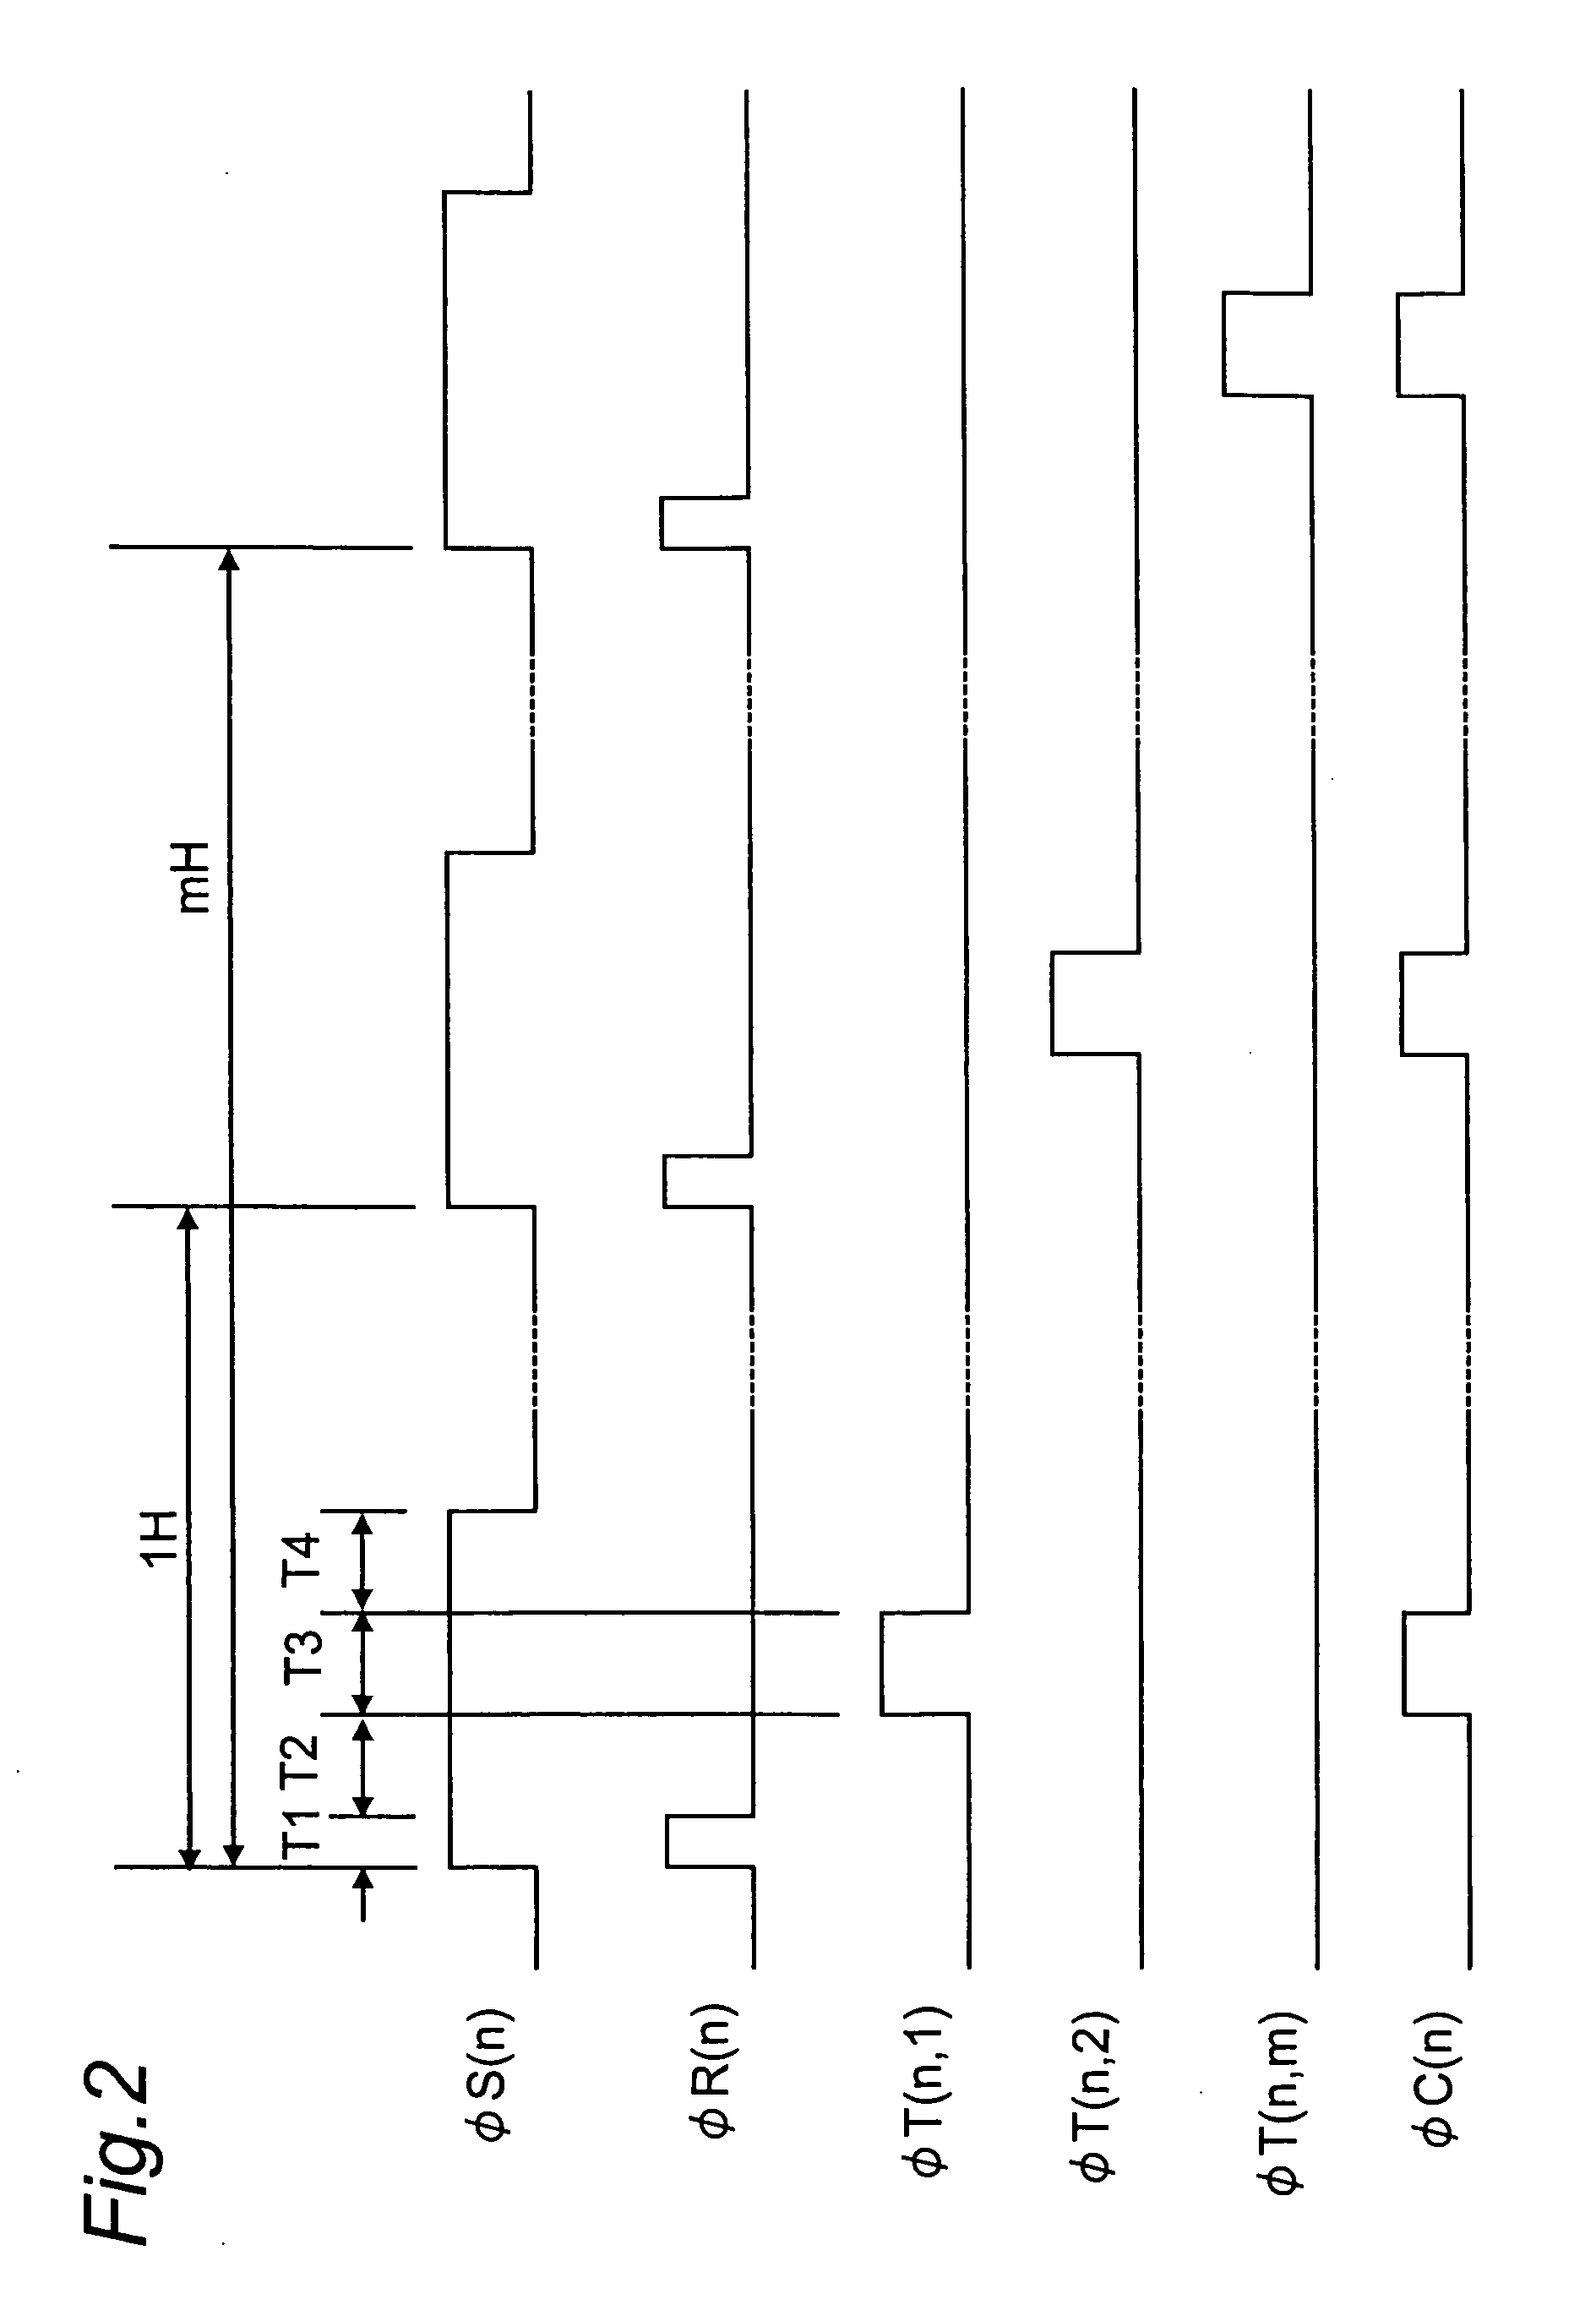 Amplifying-type solid-state imaging device